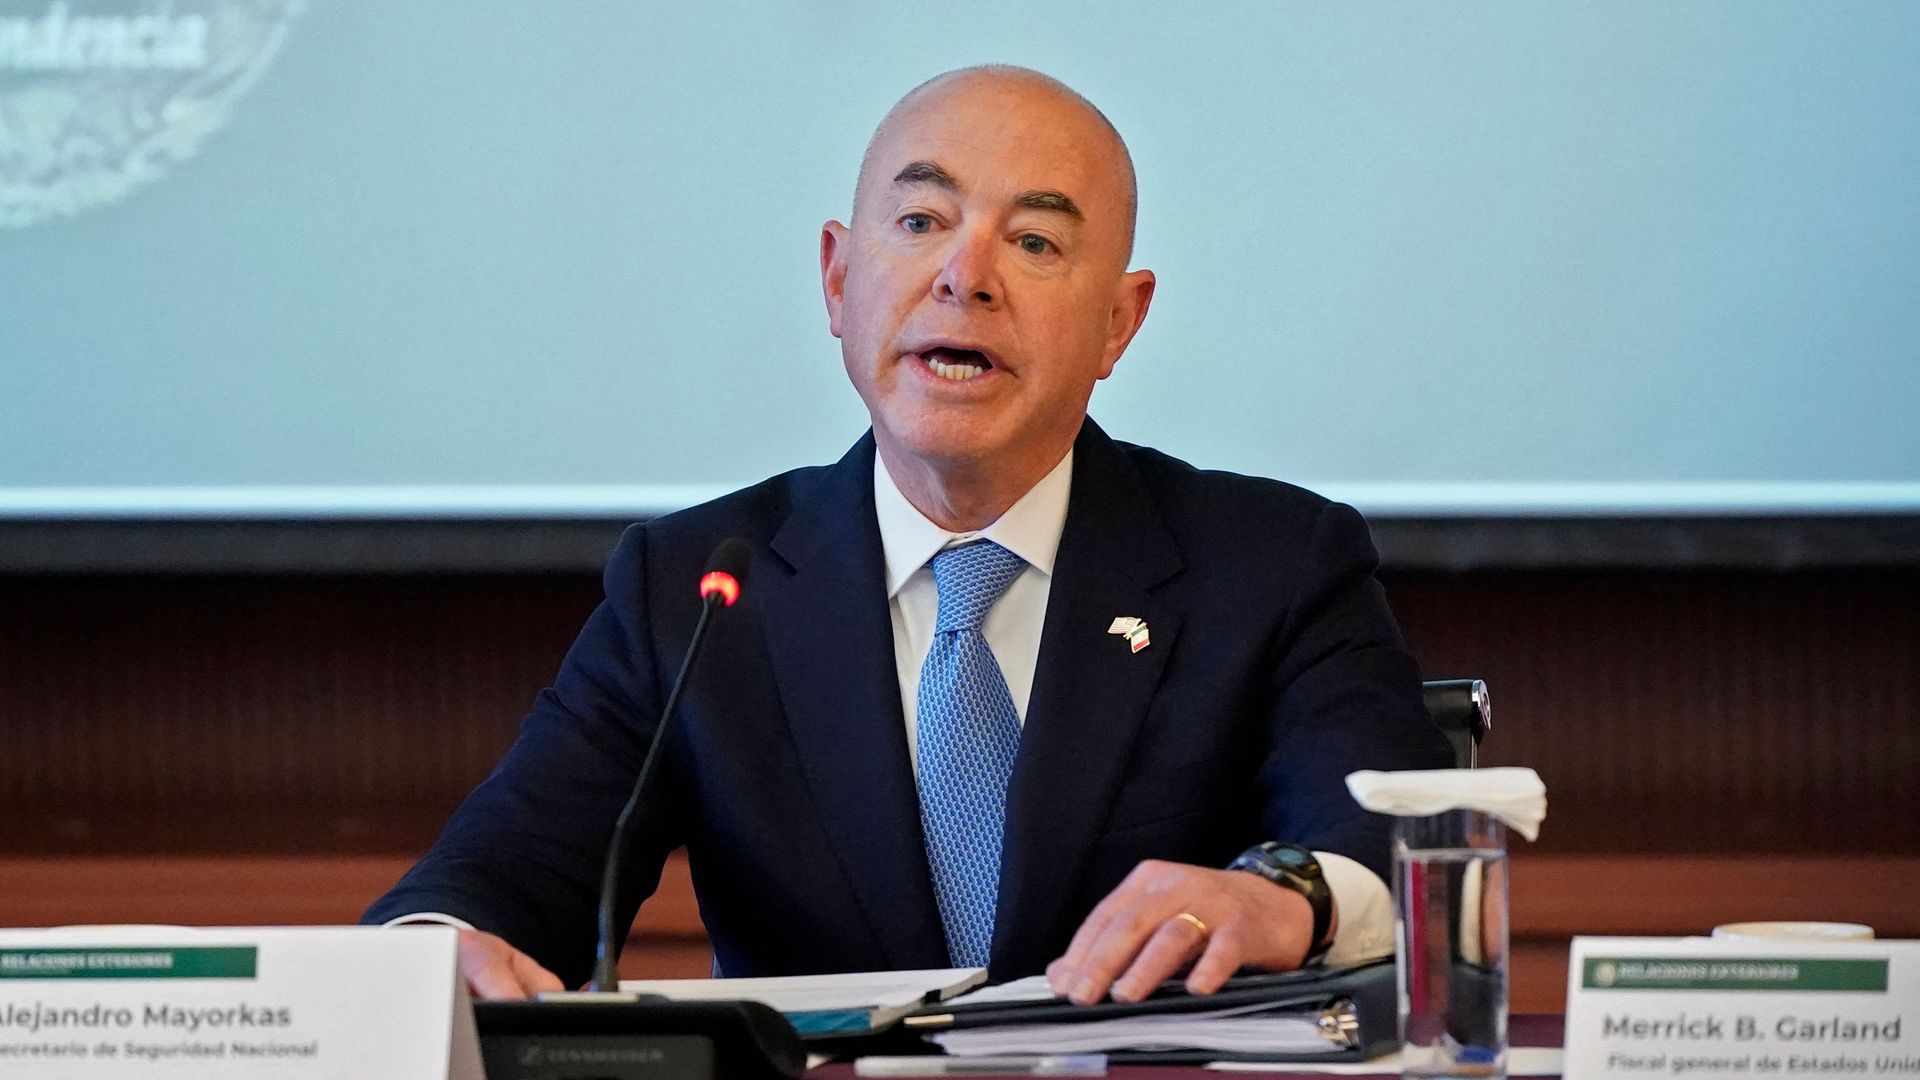 Secretary of Homeland Security Alejandro Mayorkas speaks during the US-Mexico High Level Security Dialogue at the Mexican Ministry of Foreign Relations in Mexico City, on October 8, 2021.